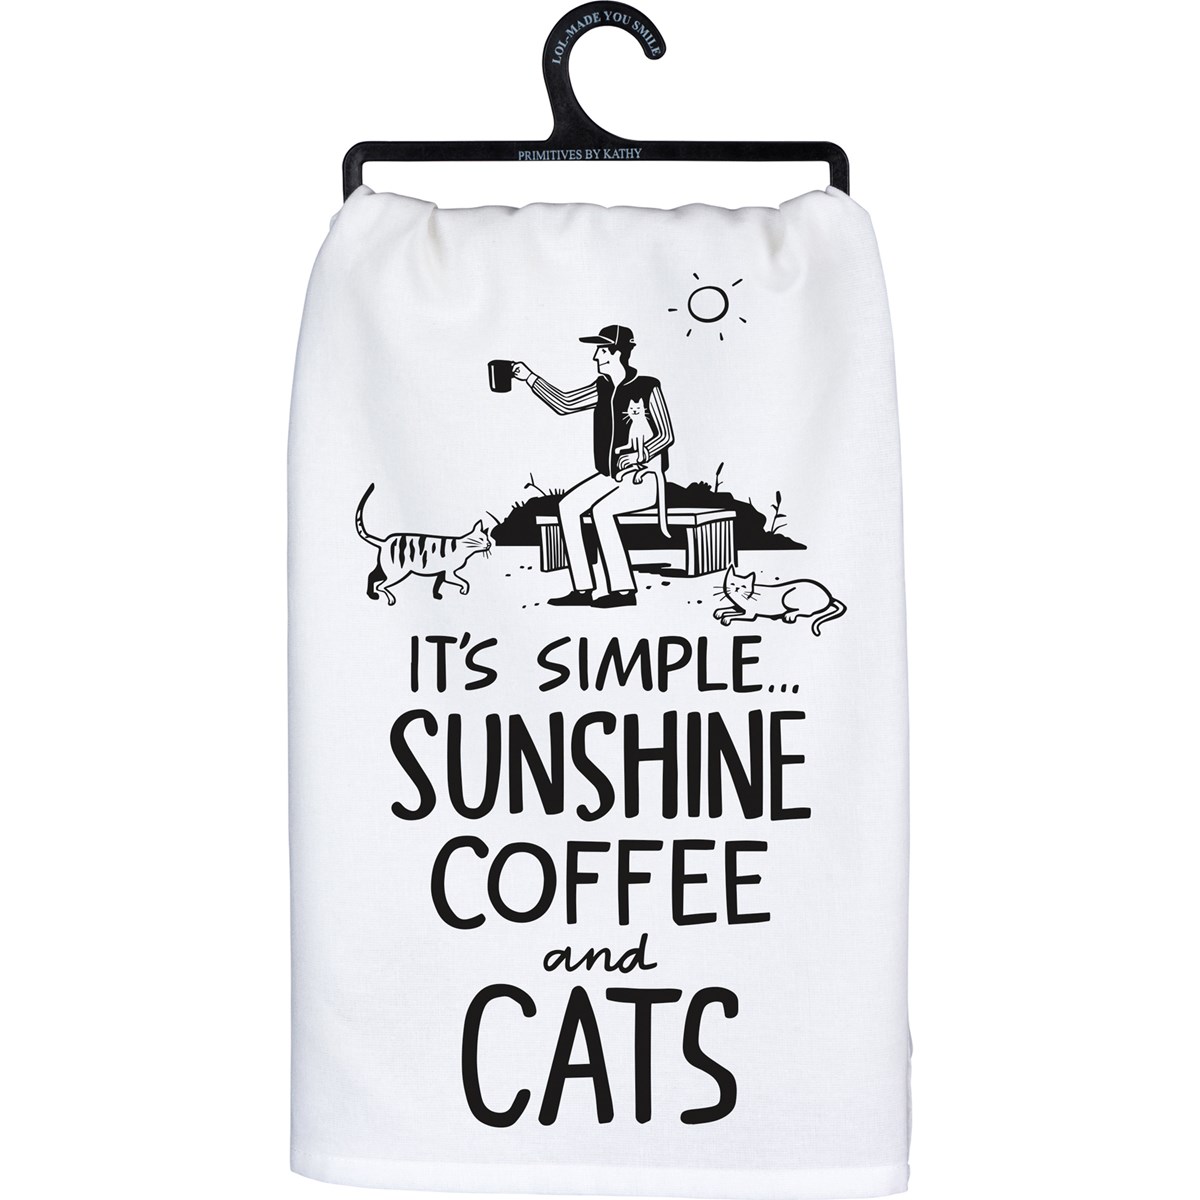 Sunshine Coffee And Cats Kitchen Towel - Cotton